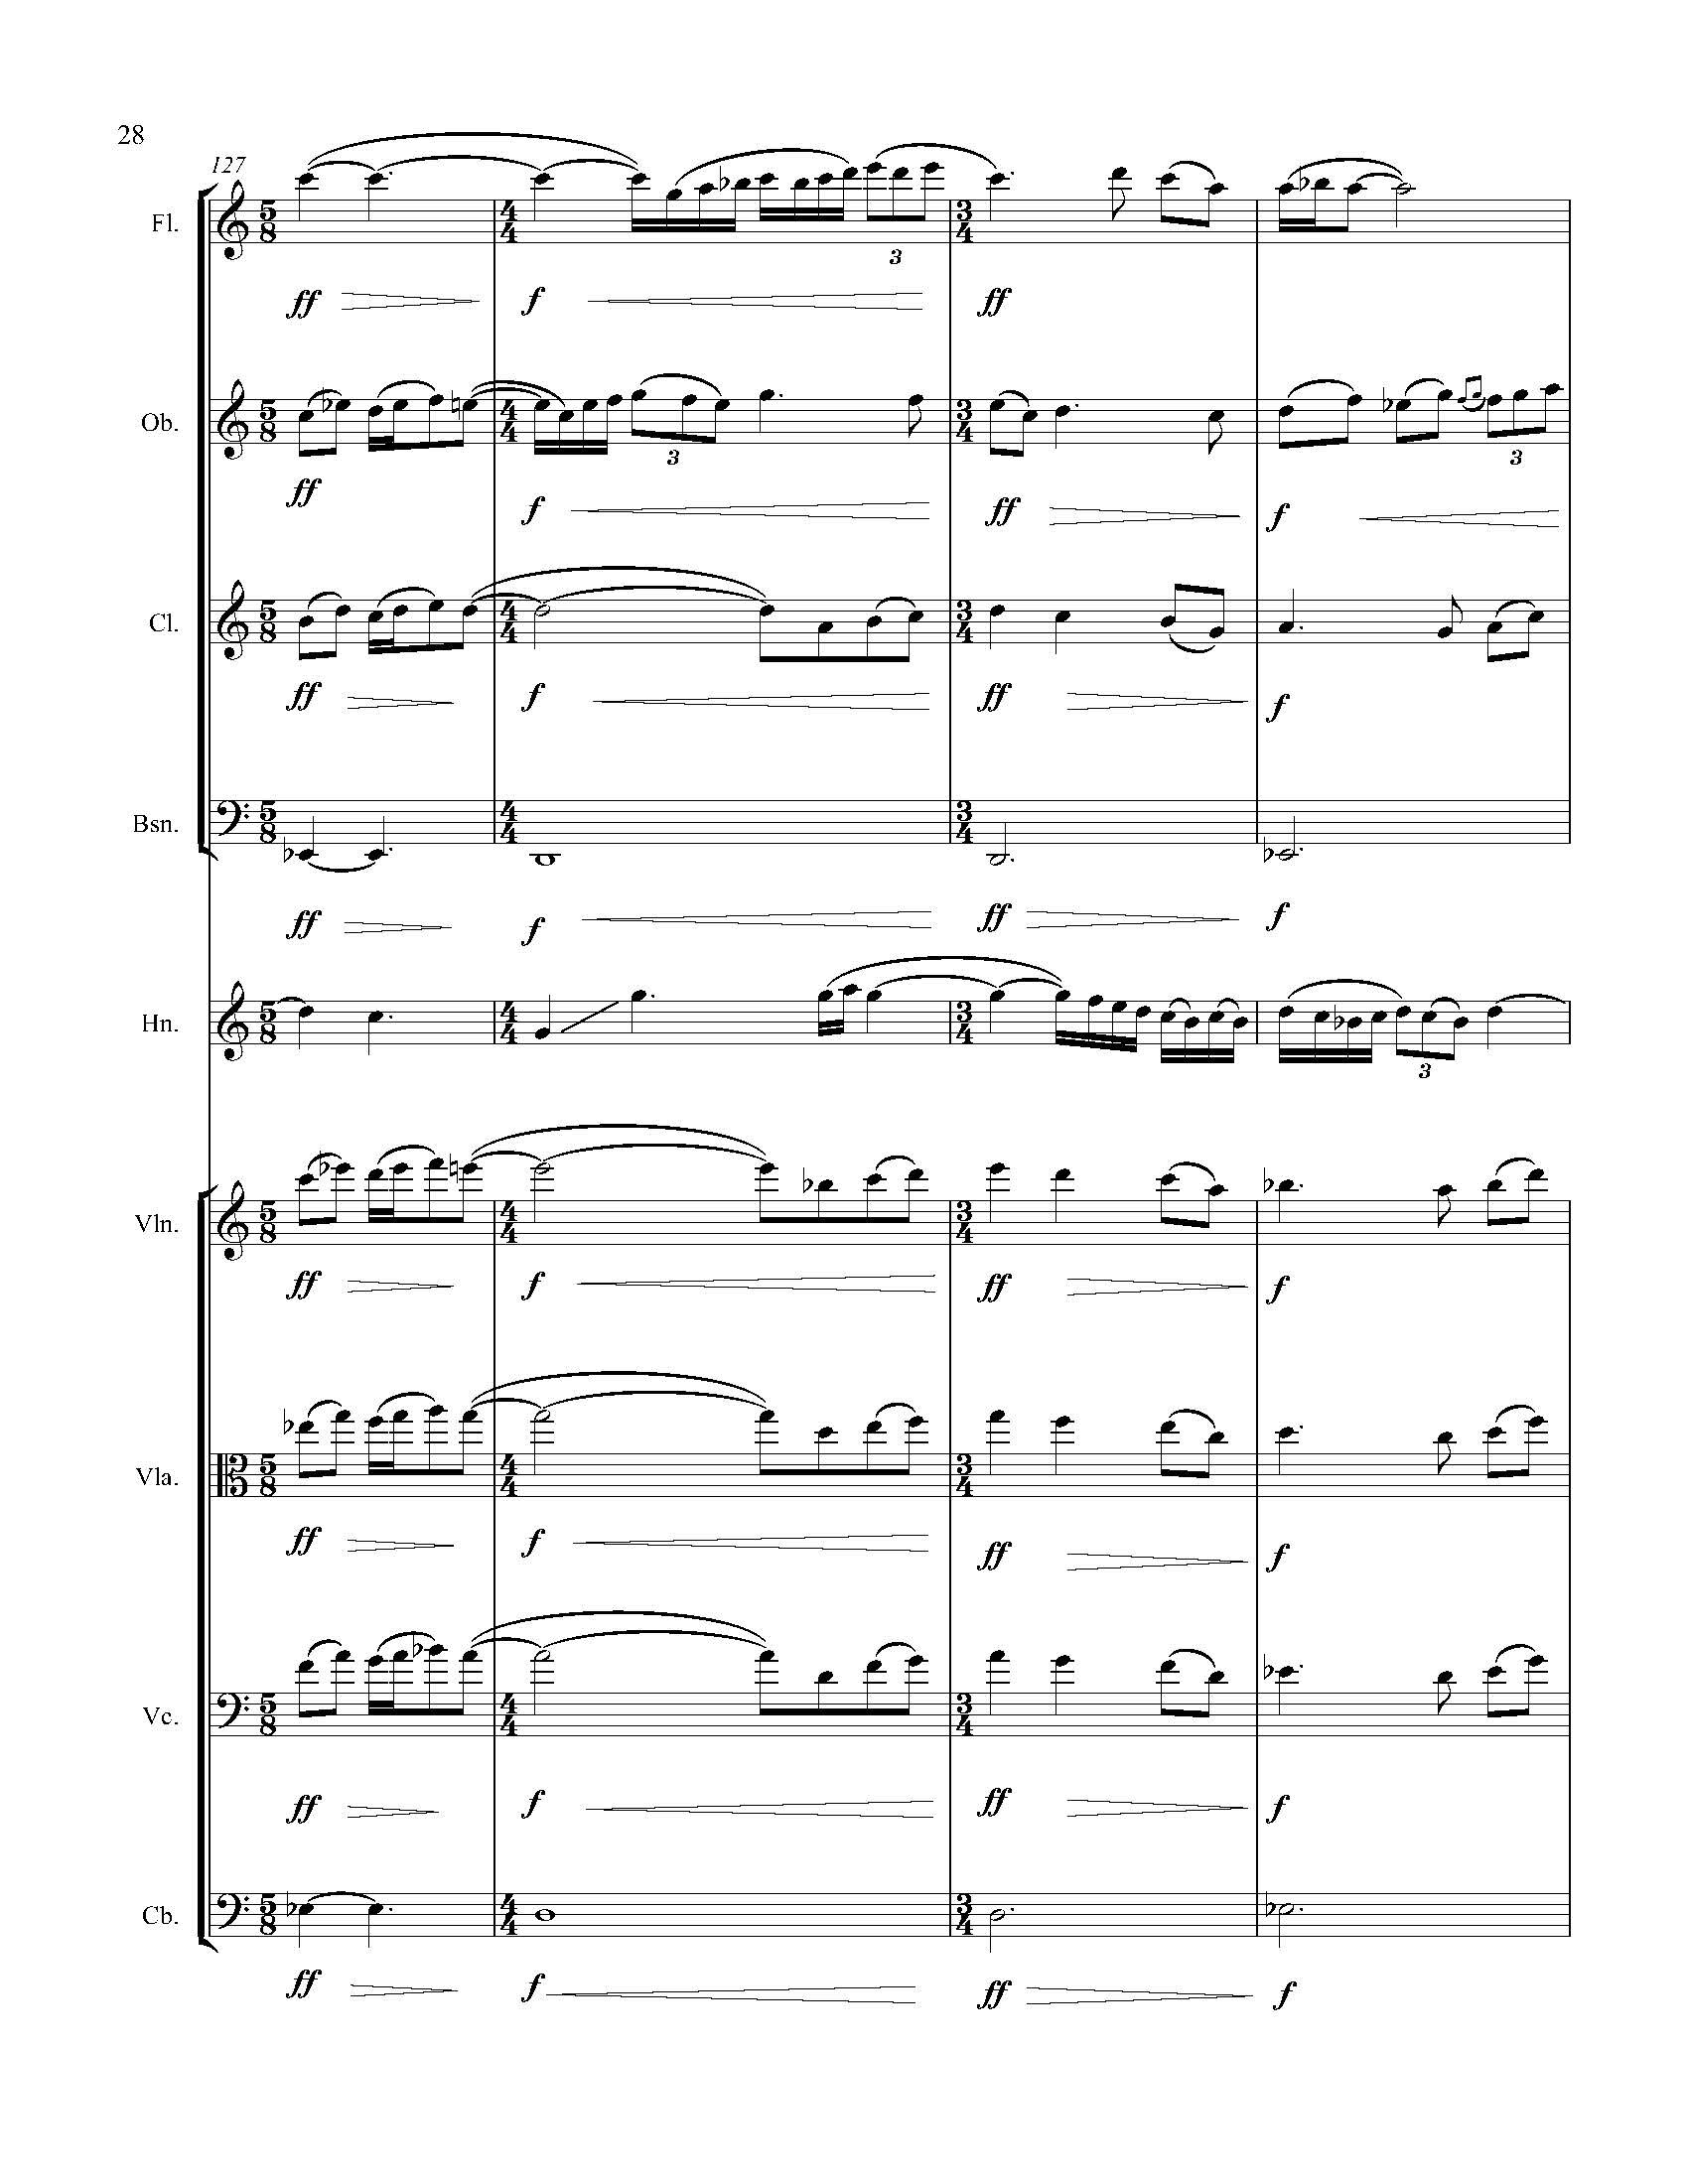 In Search of a Bird - Complete Score_Page_34.jpg